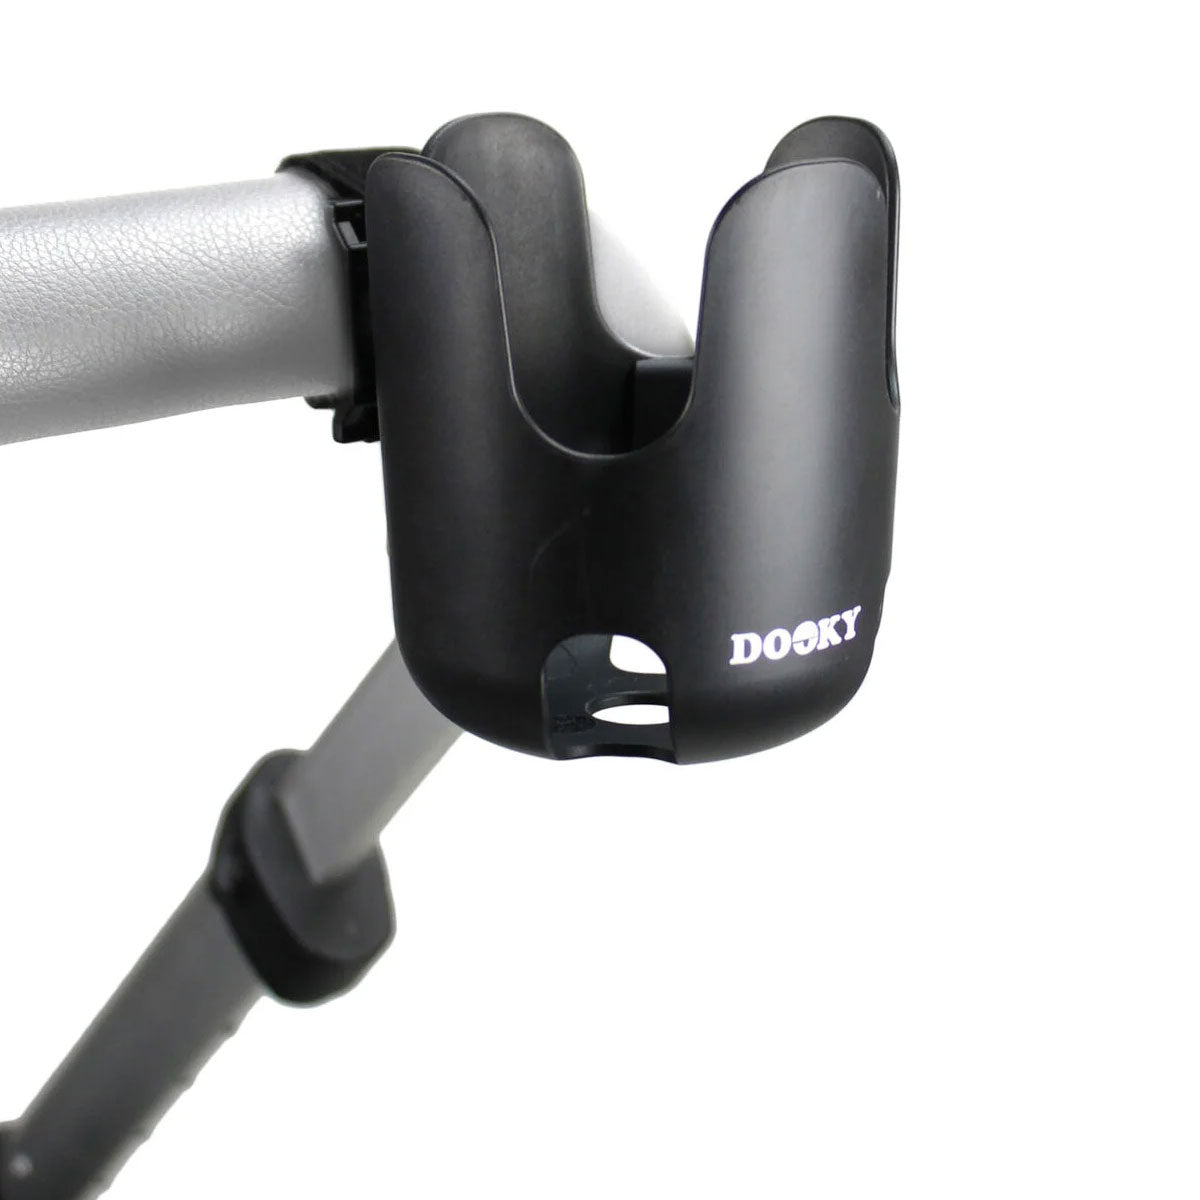 The Dooky cup holder! This universal cup holder is easy to attach to any pram, pushchair, buggy, or stroller.